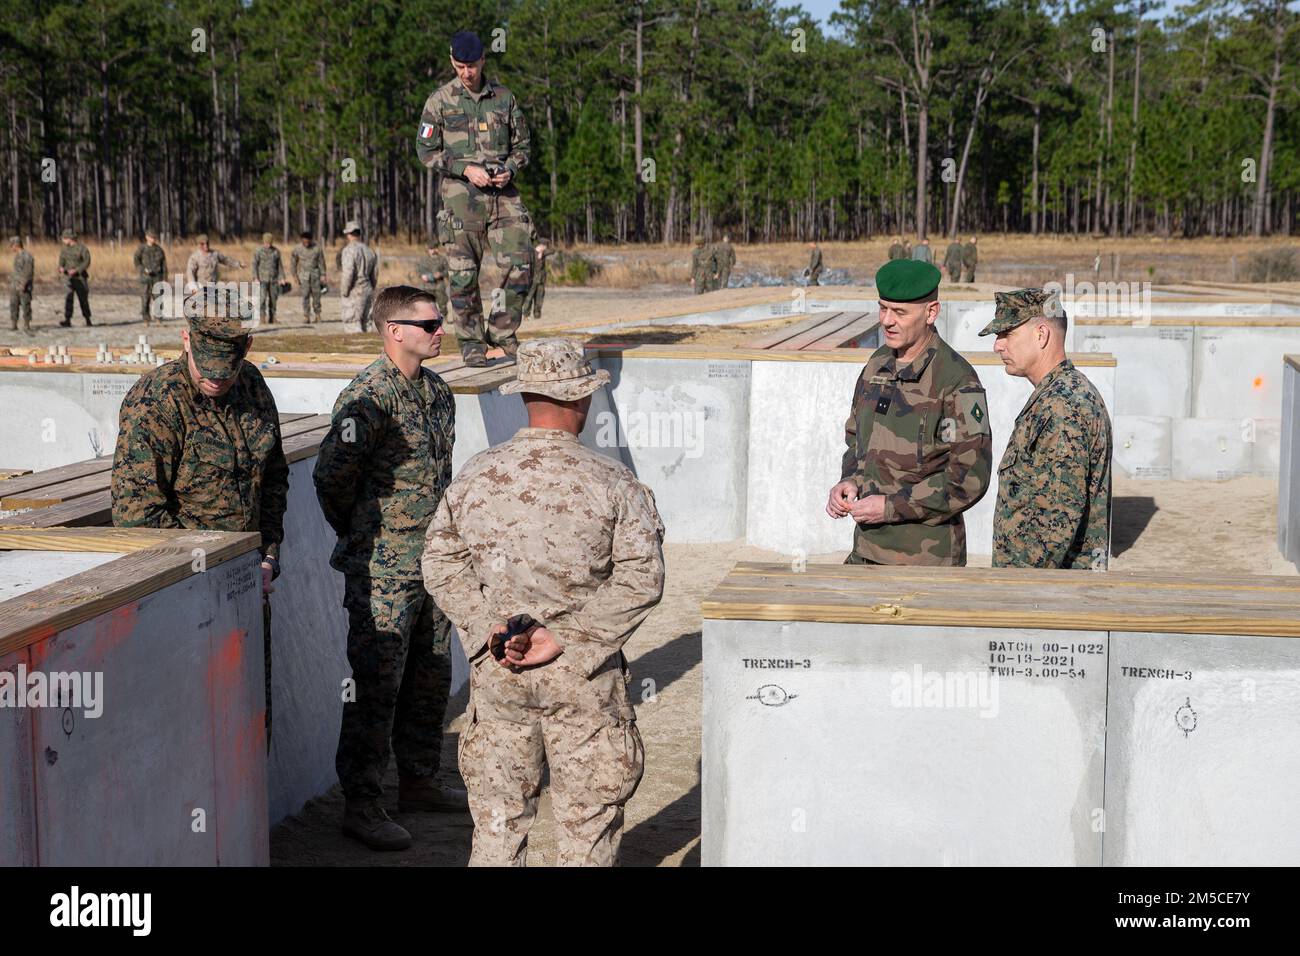 French Army Brig. Gen. Eric Ozanne, the commanding general (CG) of 6th Light Armored Battalion (LAB), speaks to Marines with 2d Marine Division on Camp Lejeune, North Carolina, Mar. 1, 2022. The visit included events on Camp Lejeune and other military installations along the East Coast. The purpose of the engagement was to increase senior leader relationships and to provide the CG of 6th LAB with a better understanding of the Marine Corps’ future combat capabilities and training opportunities. Stock Photo